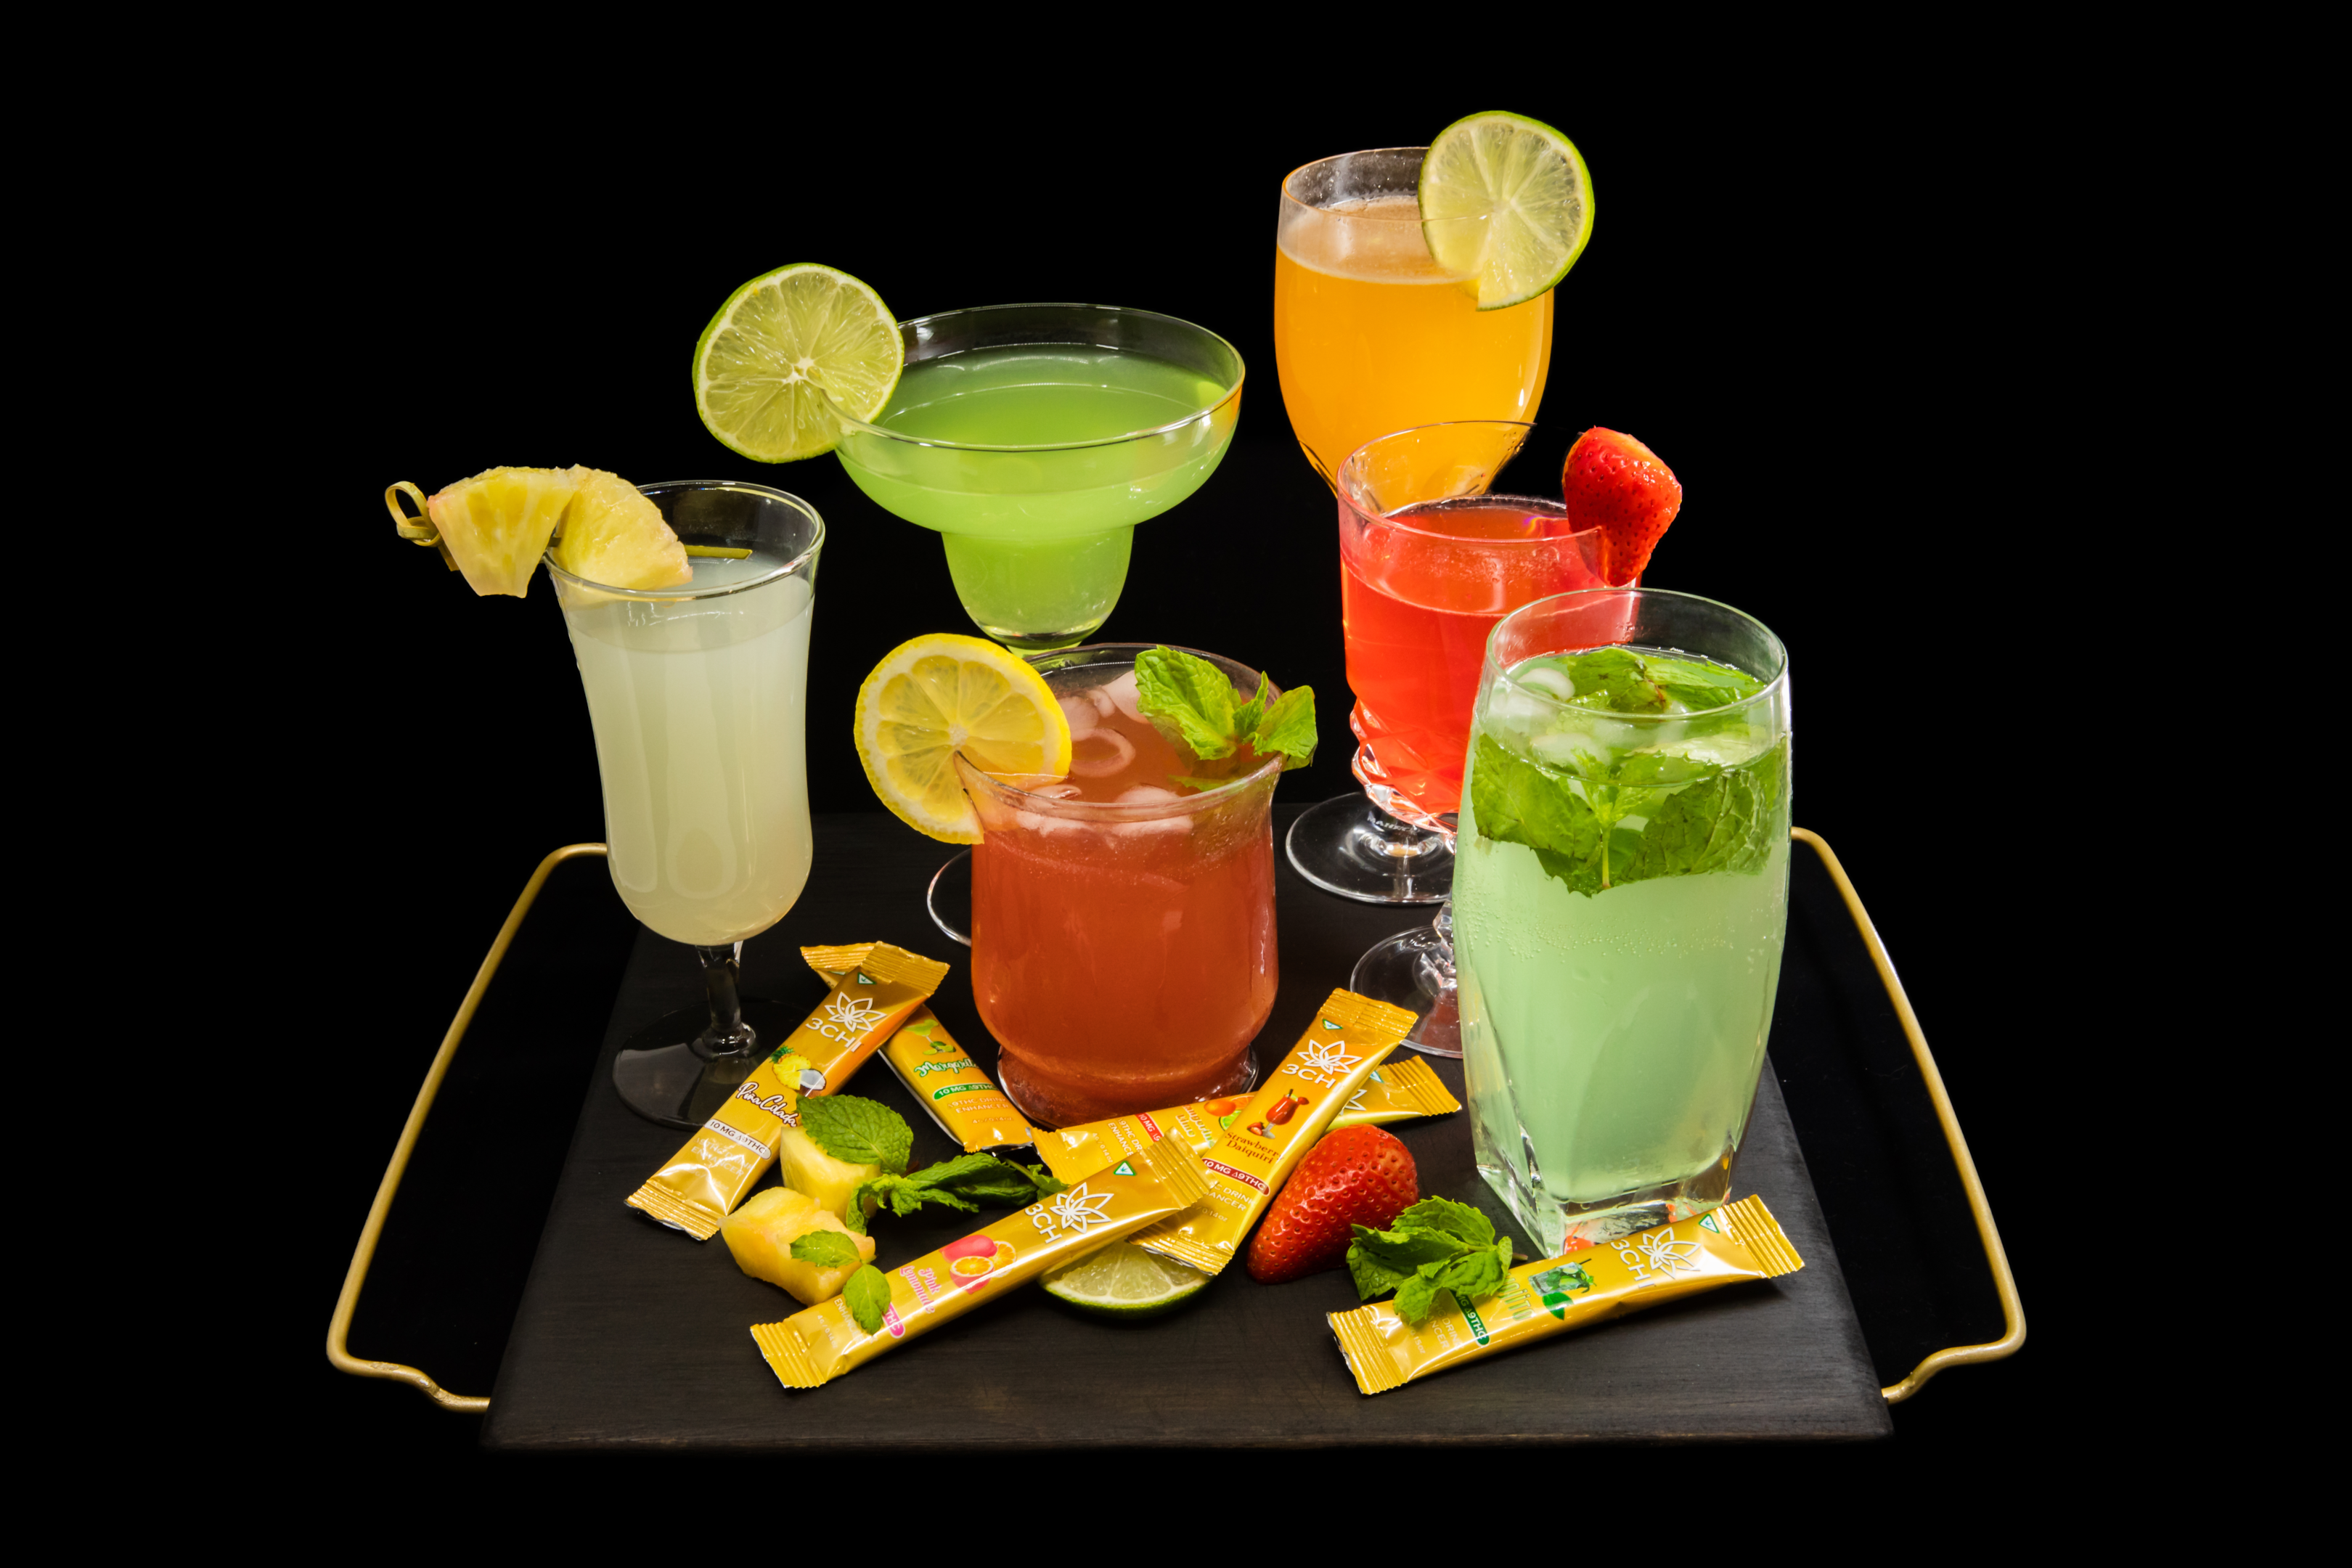 Our drink mixes are a work of art. With reported social proof about the flavor and style of these drink enhancers, your mocktails can be a fashion statement among a part of gen z women or a conversation starter.